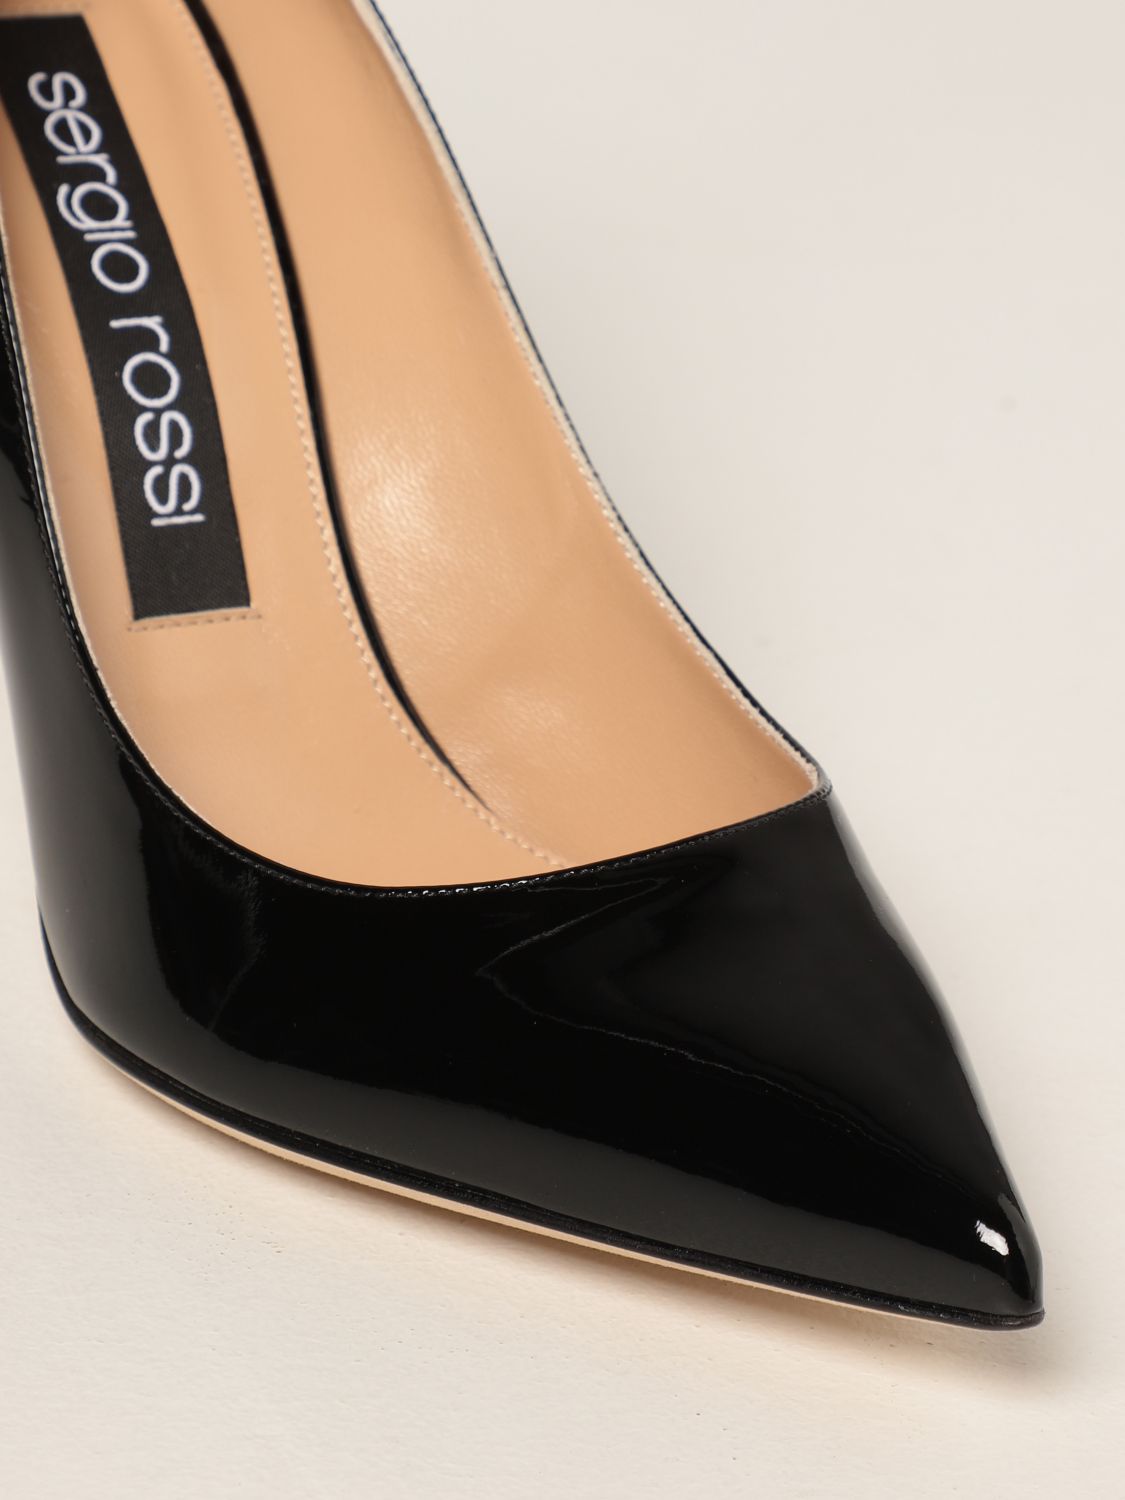 Court shoes Sergio Rossi: Sergio Rossi court shoes for women black 4